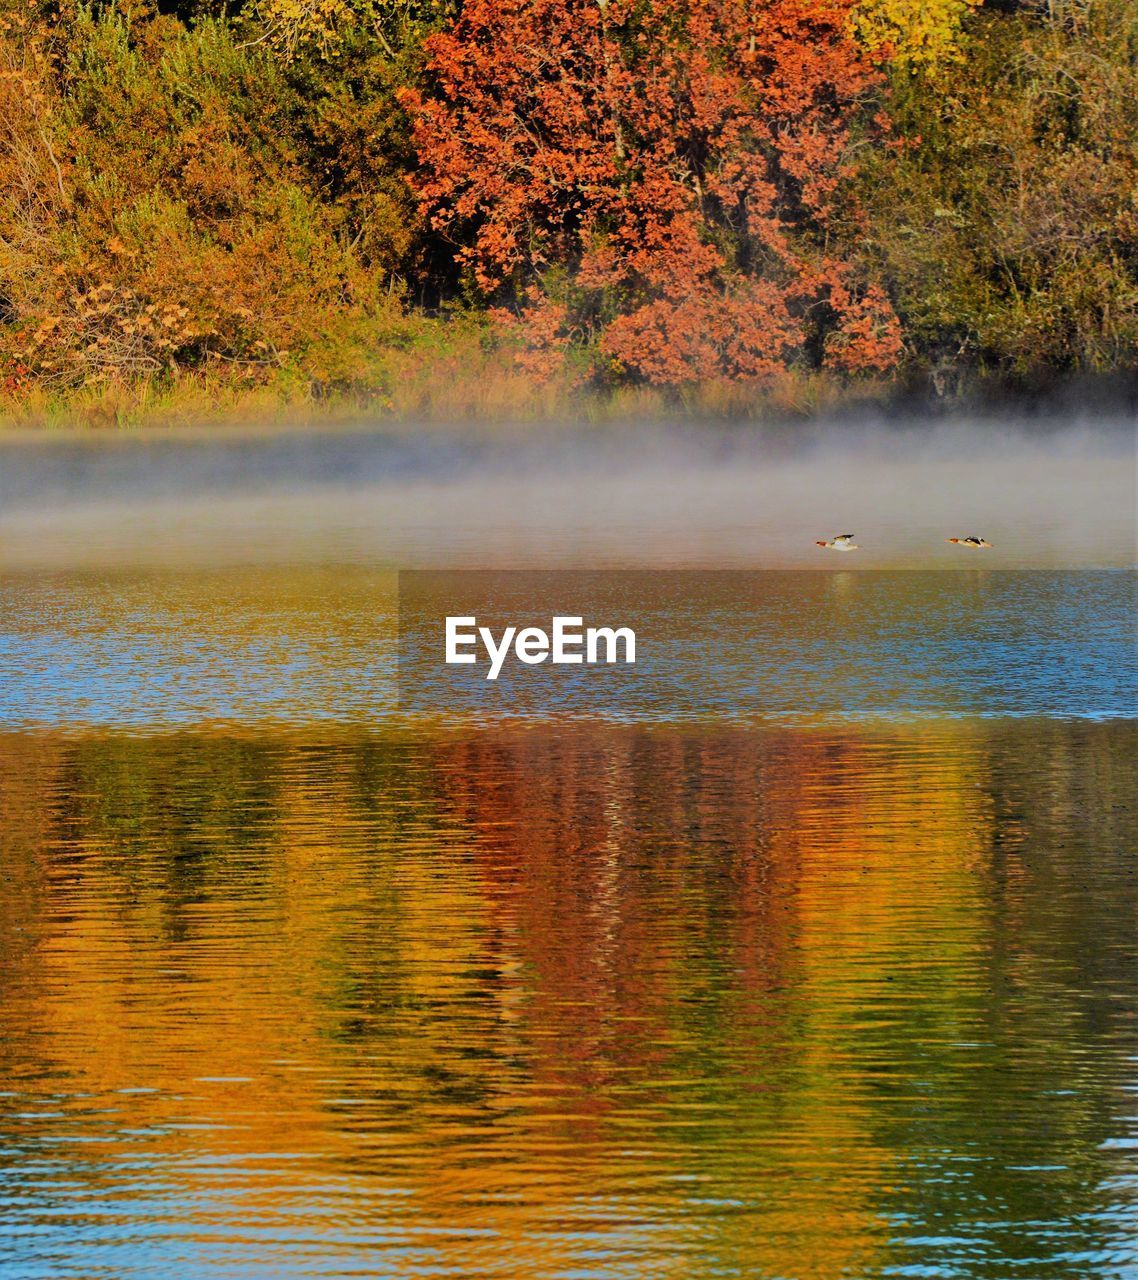 SCENIC VIEW OF LAKE BY AUTUMN TREES